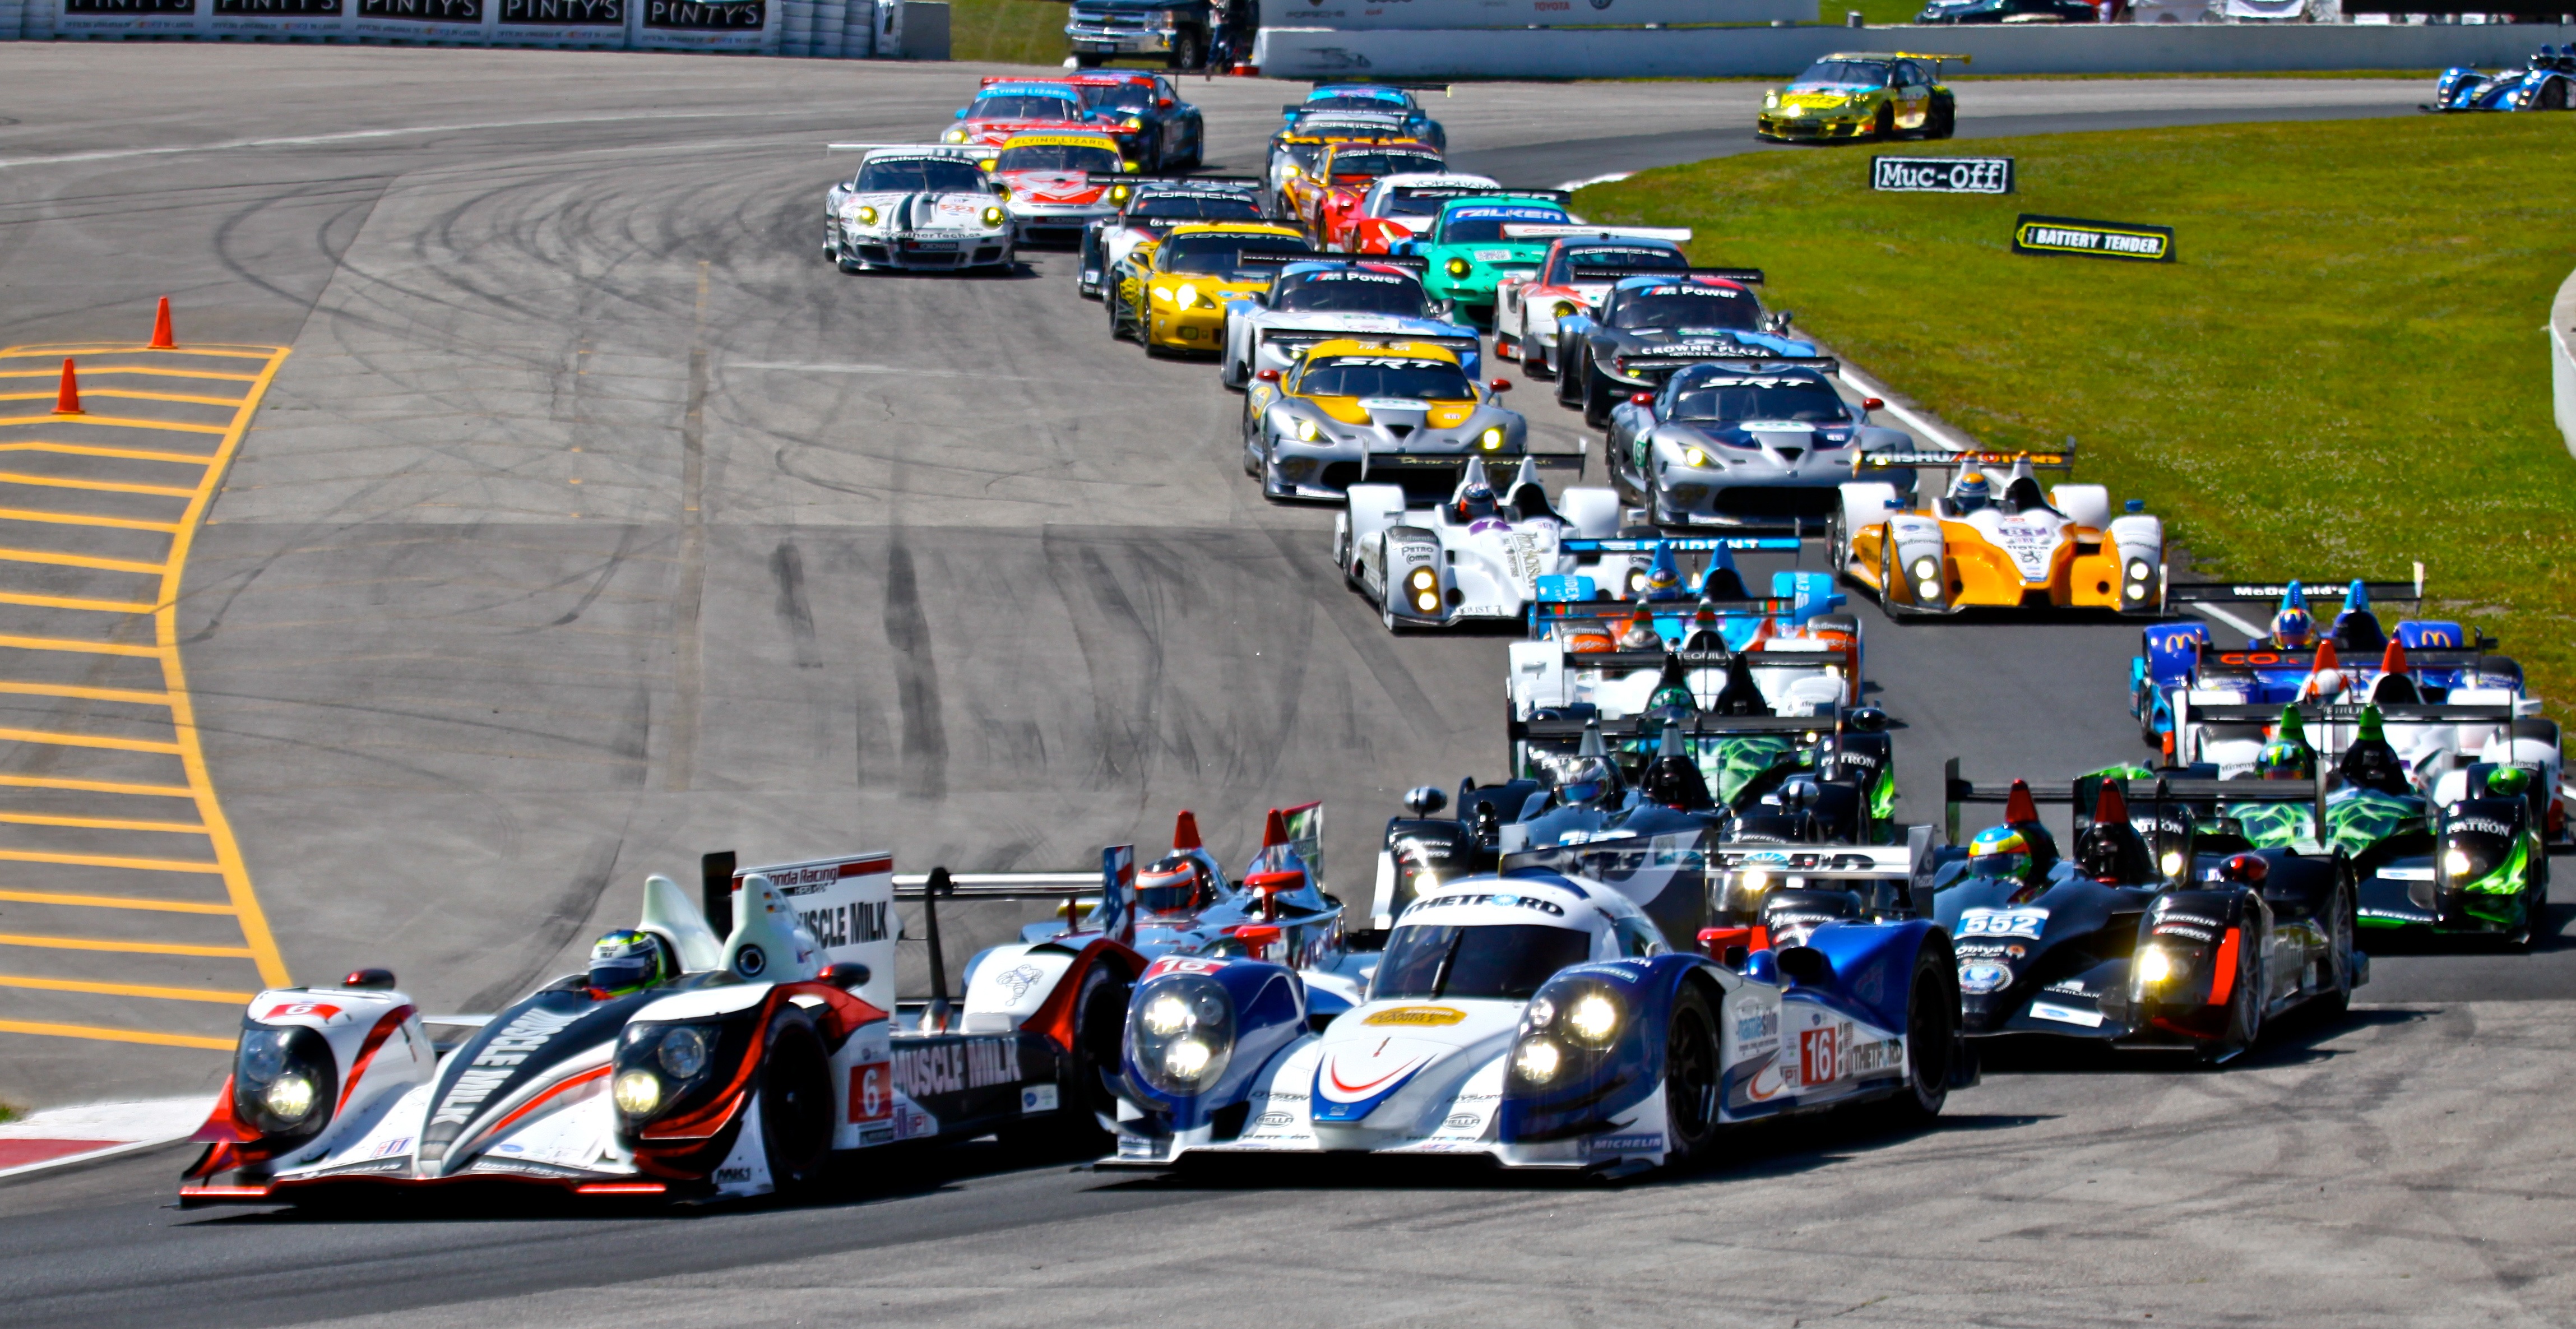 Race cars on the track at Canadian Tire Motorsport Park